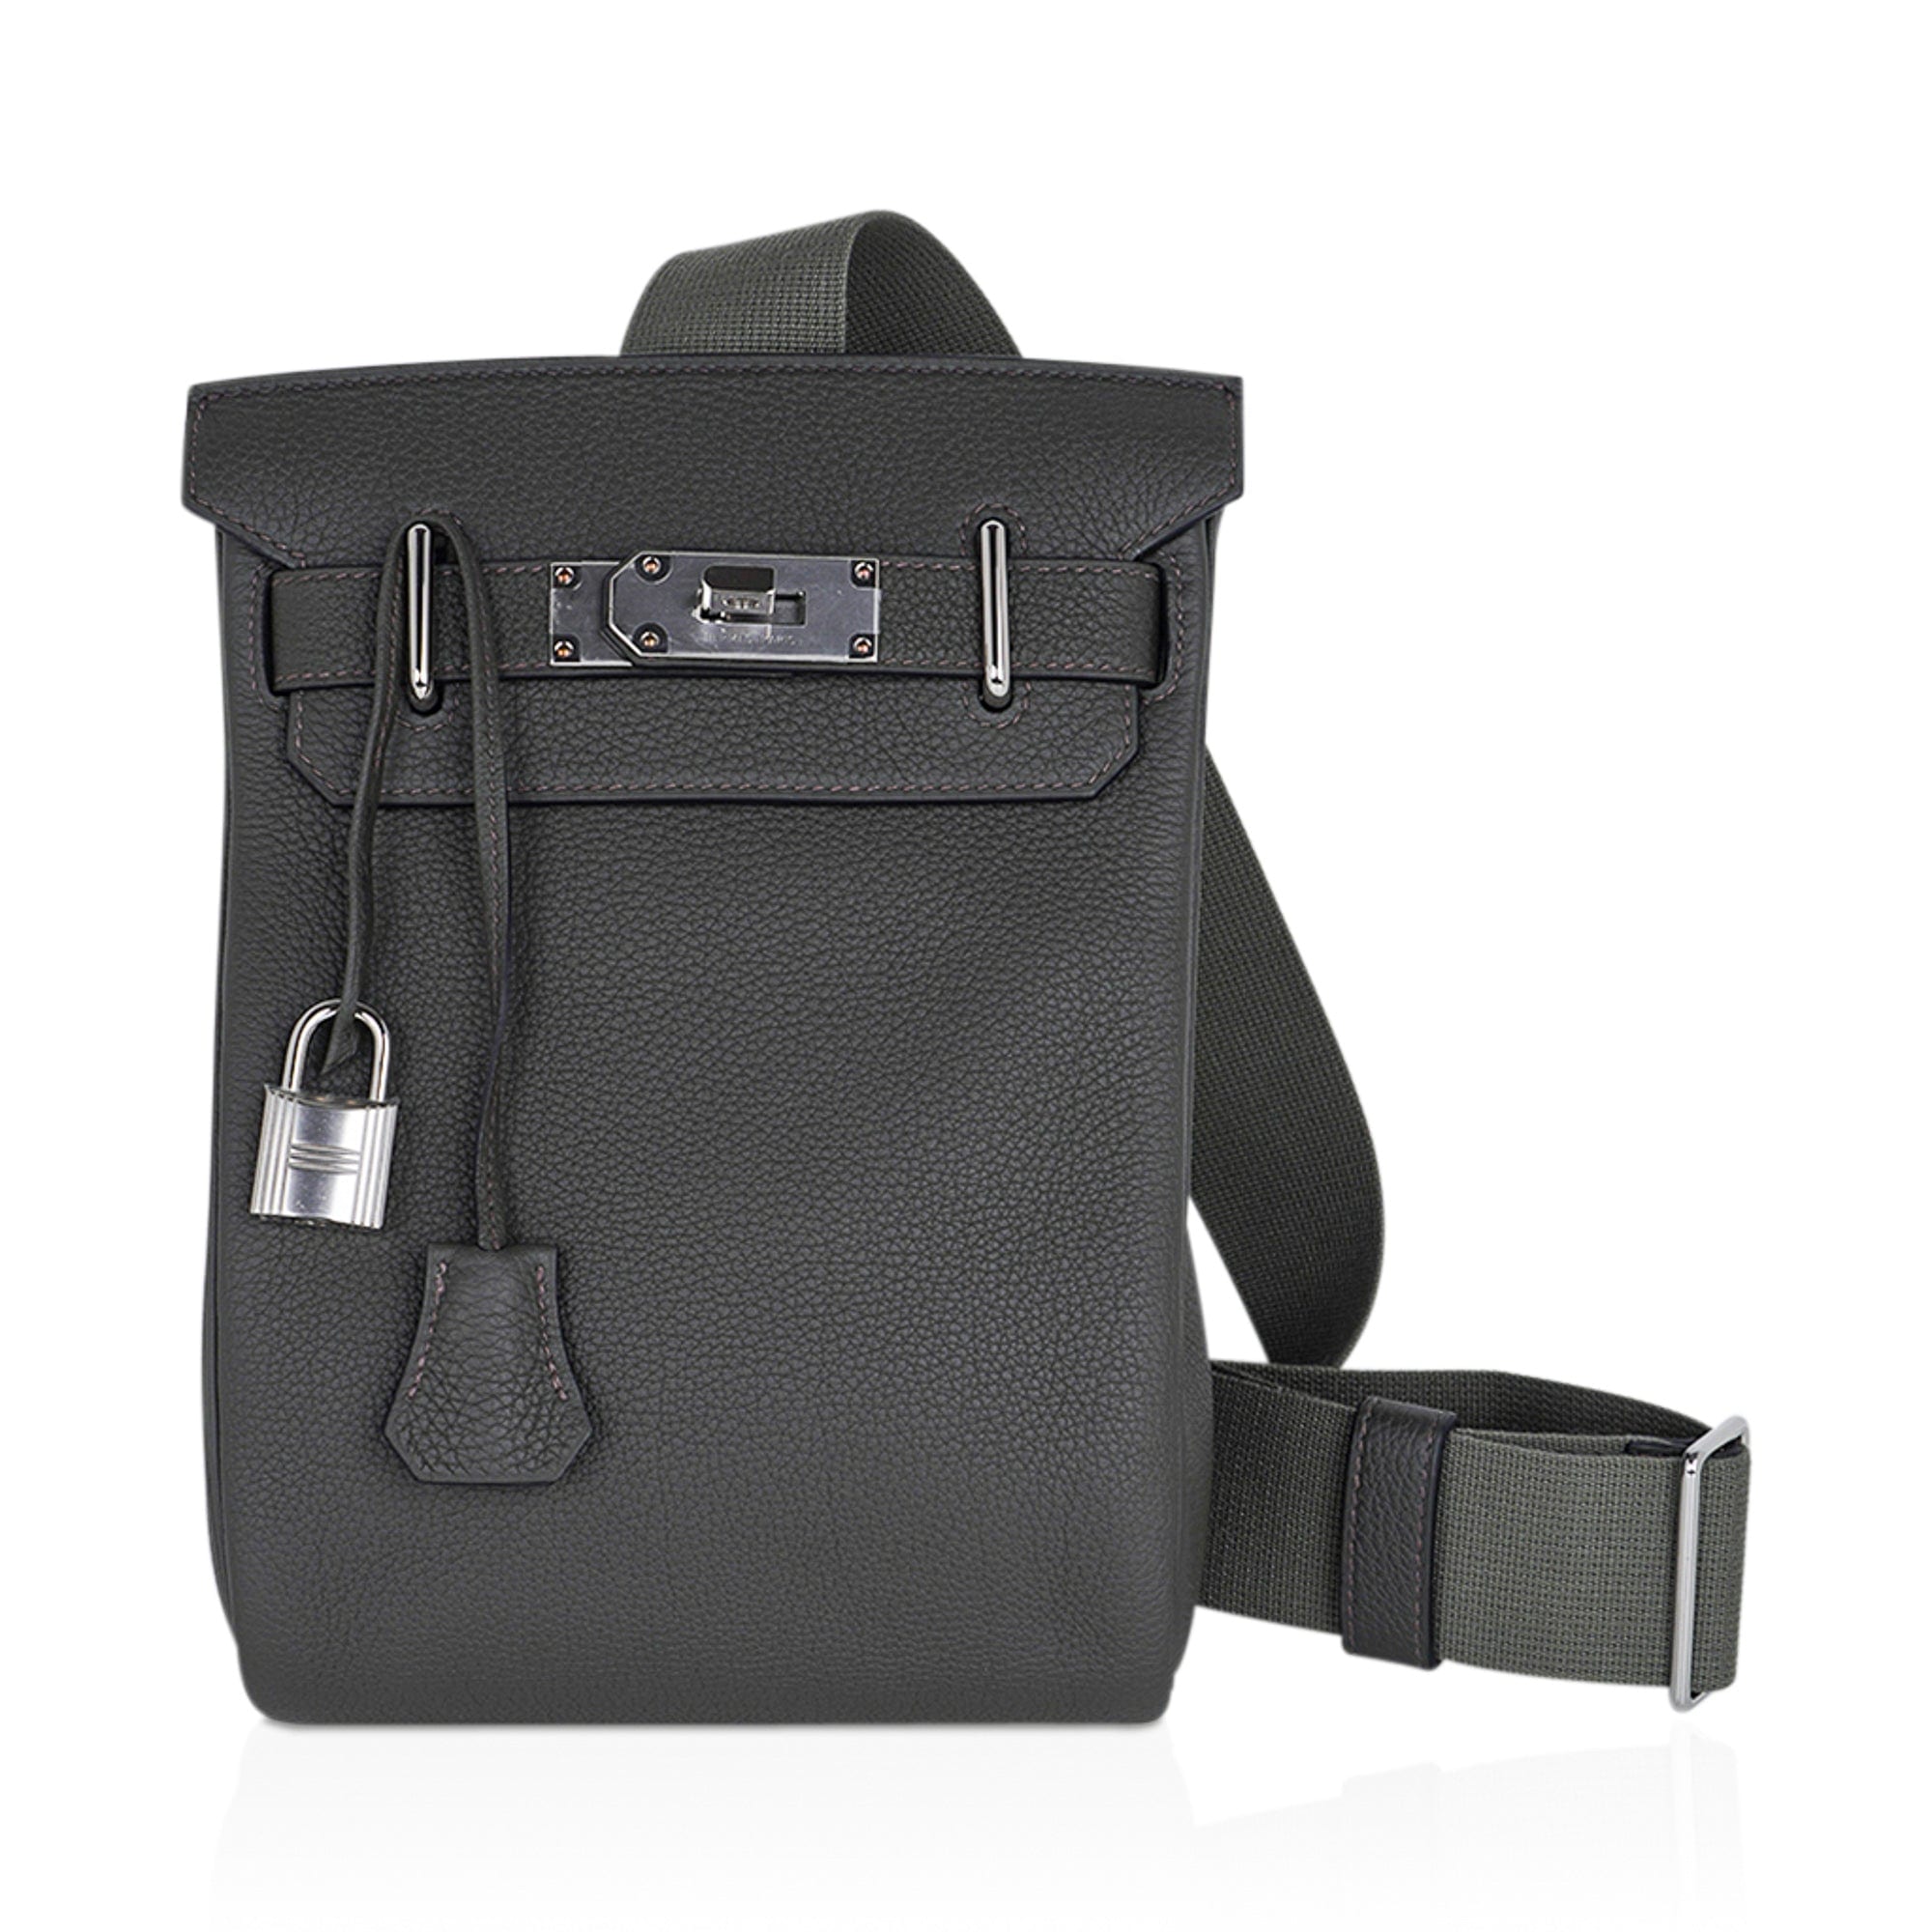 Hac a Dos GM backpack